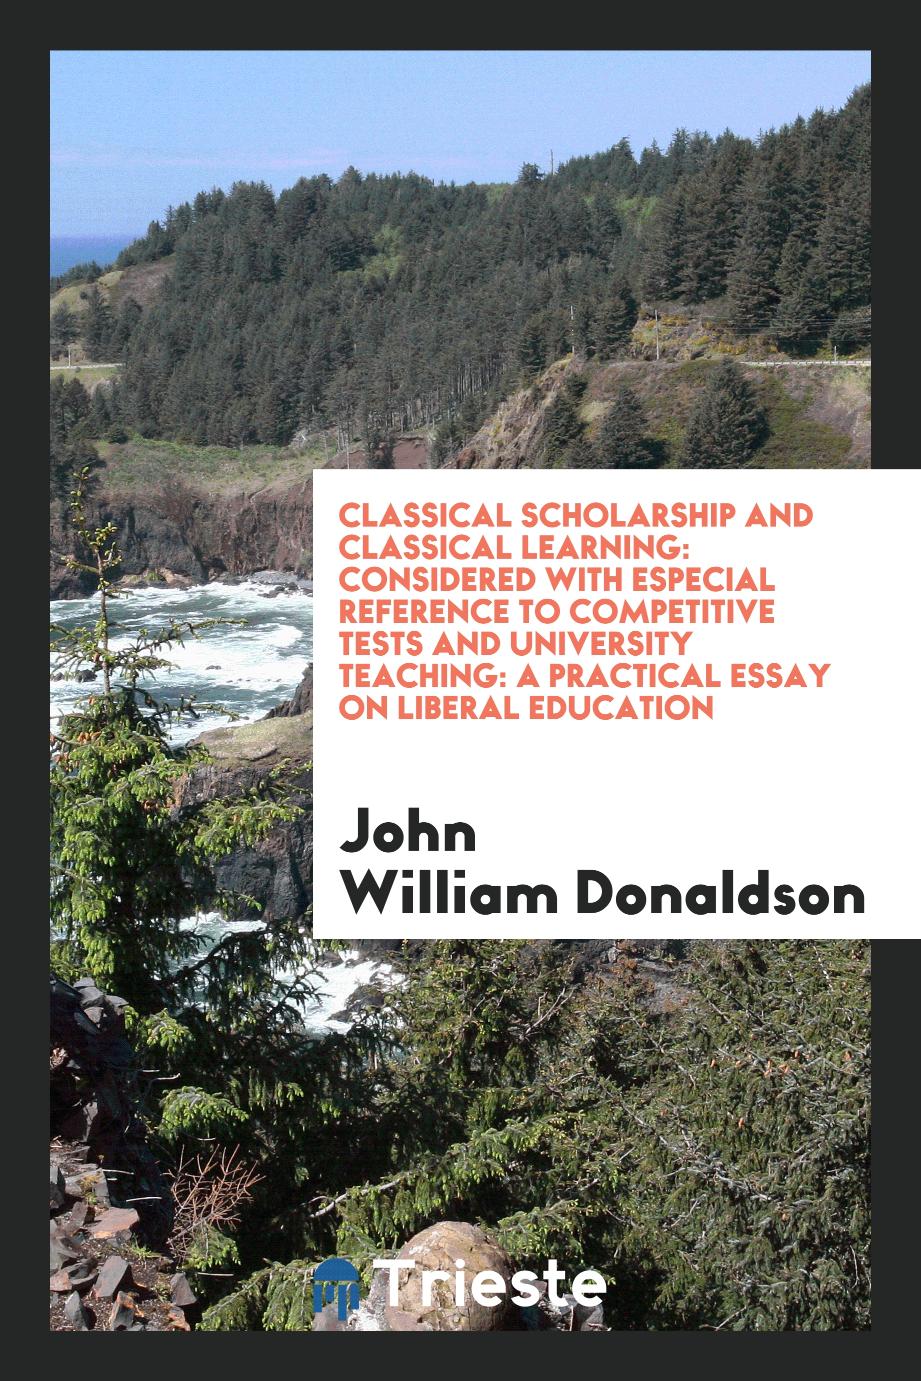 Classical scholarship and classical learning: considered with especial reference to competitive tests and university teaching: A practical essay on liberal education